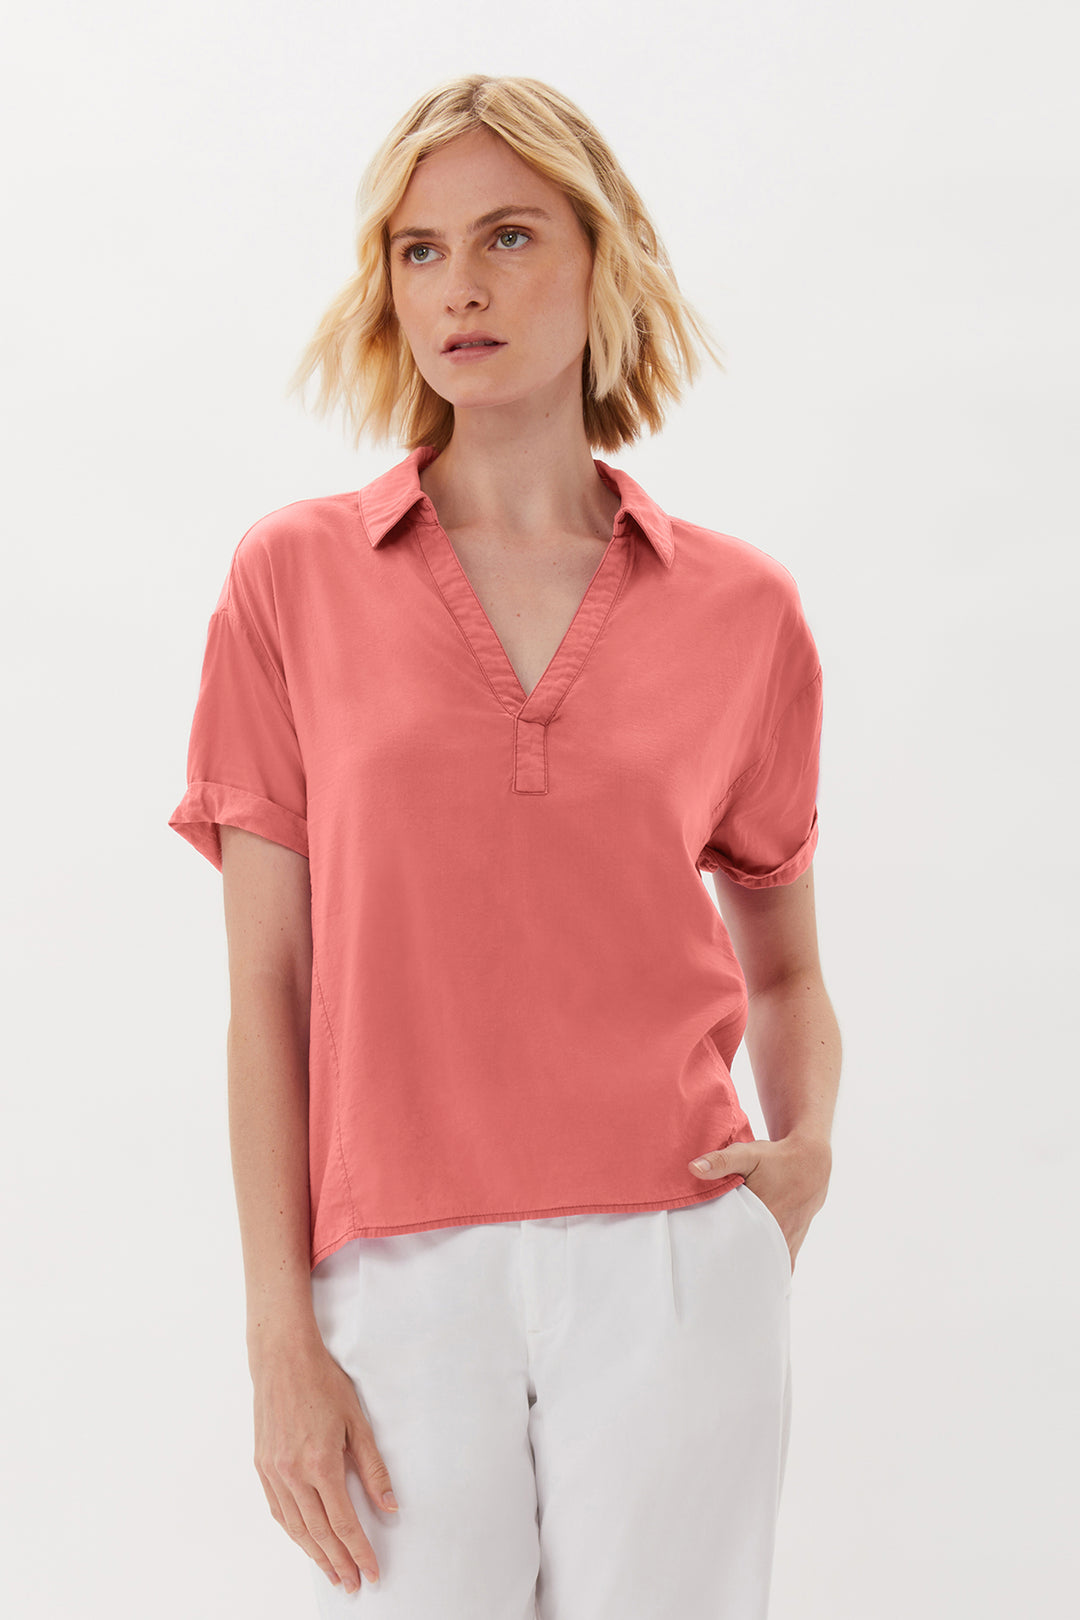 New Hutton Garment Dyed Pullover Top - Nantucket Red